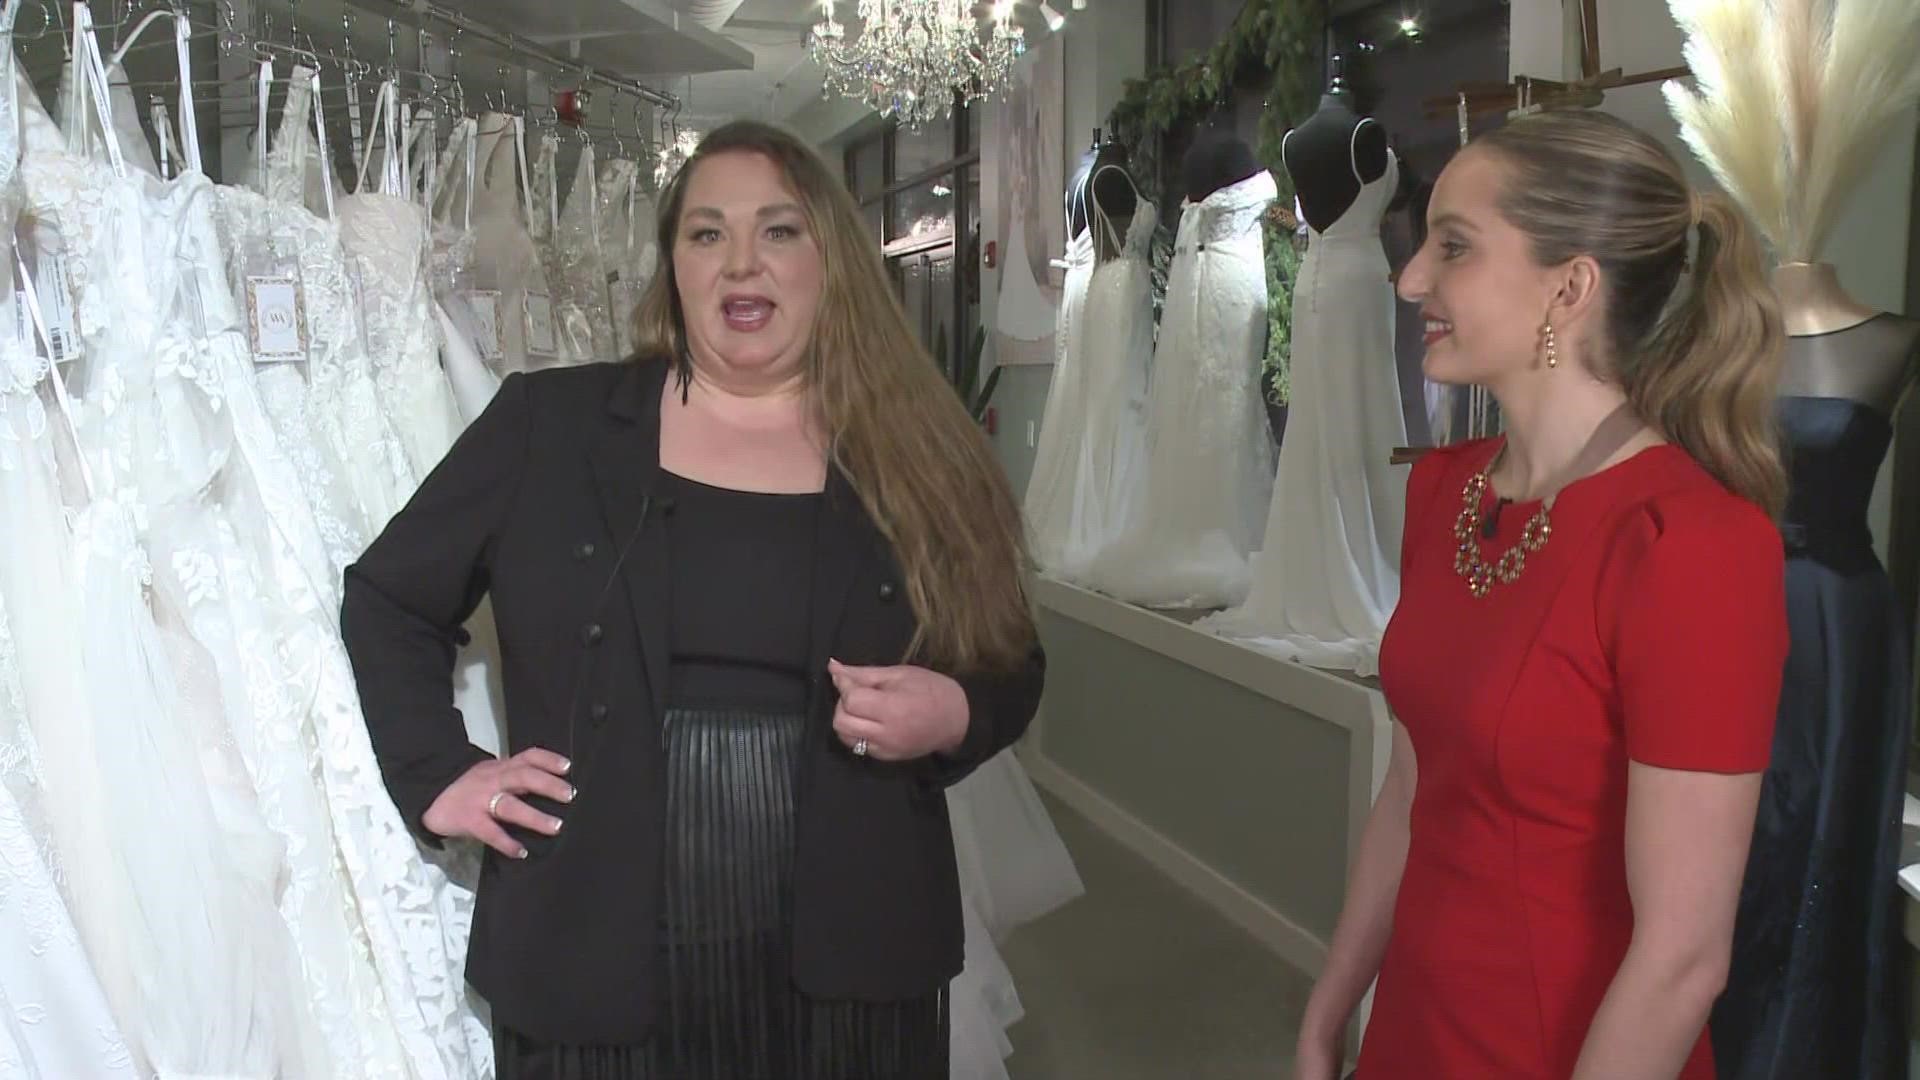 The boutique opened three weeks ago in Portland, offering a wide range of sizes and styles.